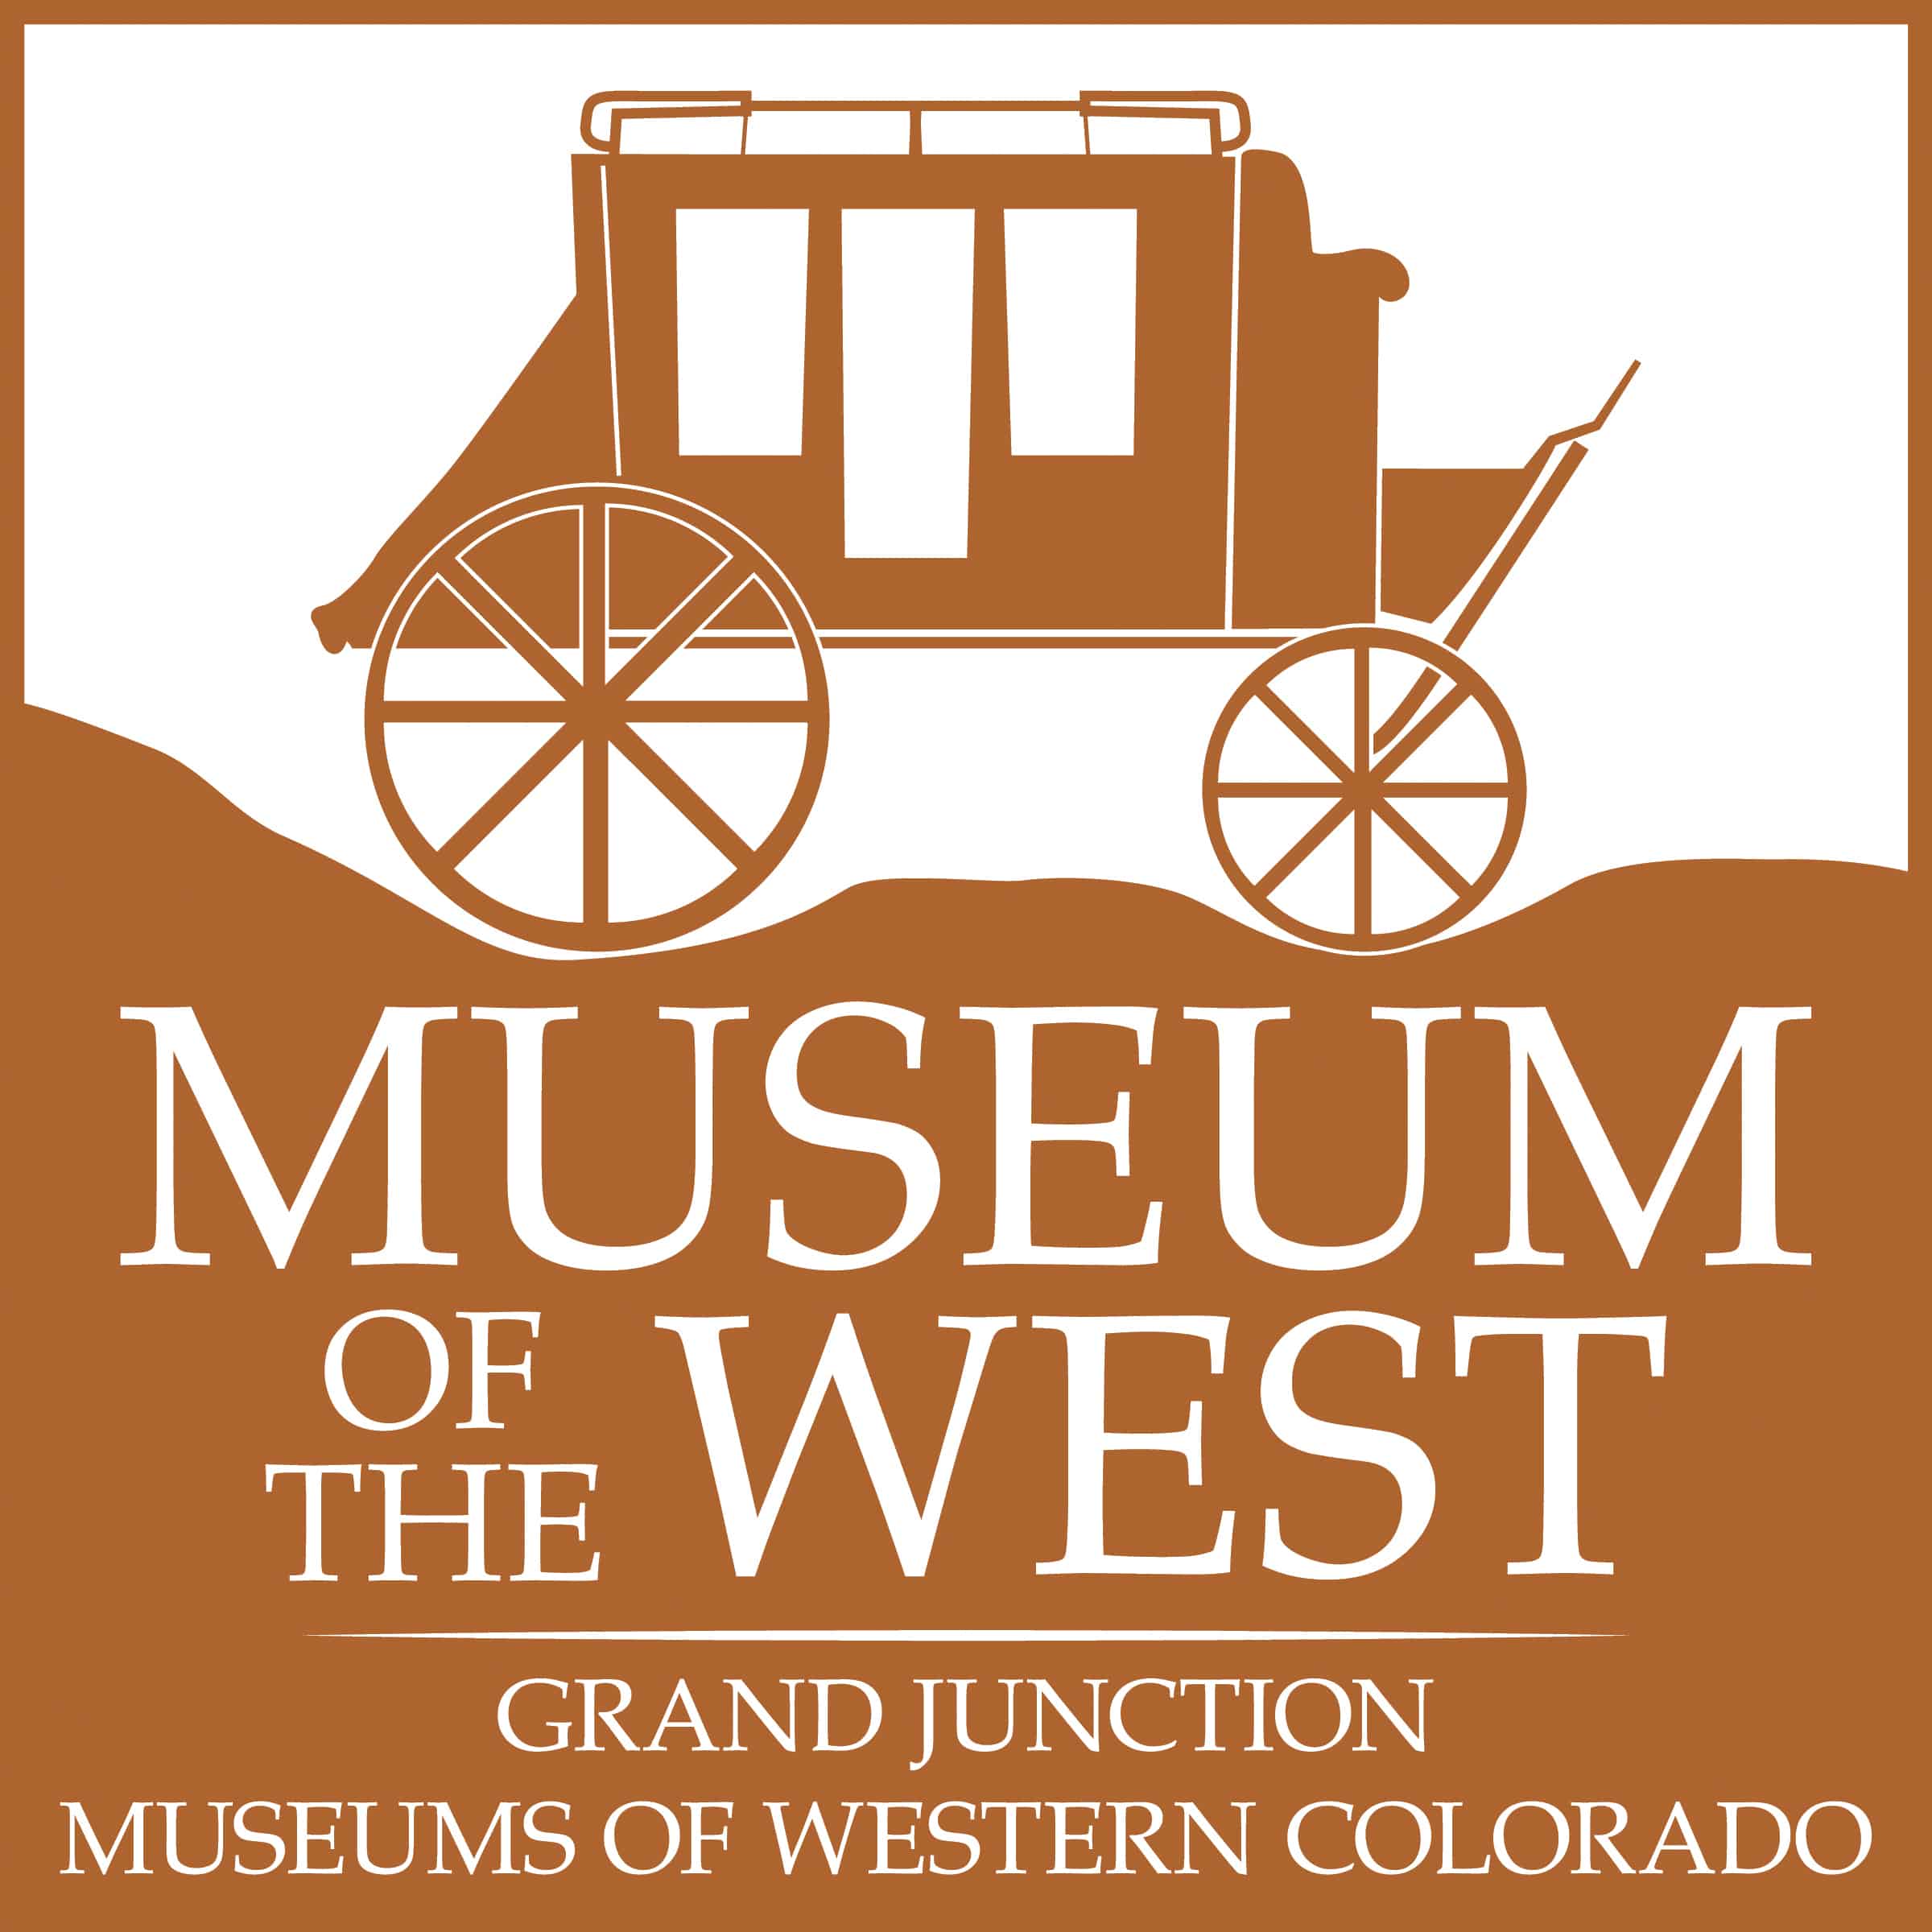 Welcome to the Museums of Western Colorado